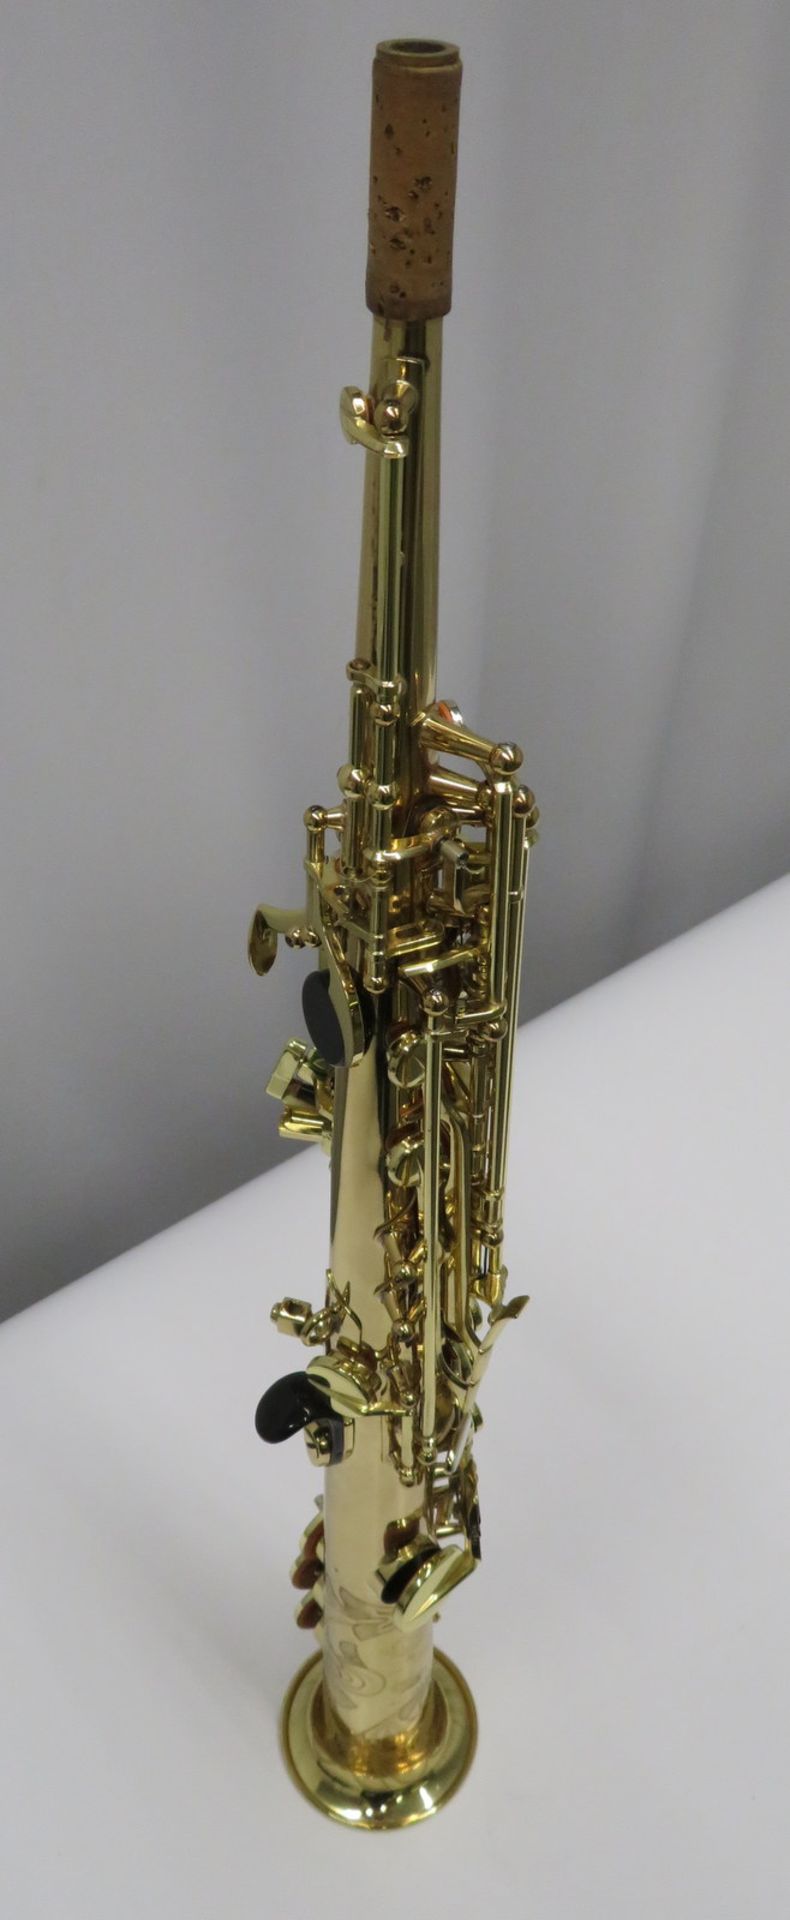 Henri Selmer 80 super action series 2 soprano saxophone with case. Serial number: N.530523. - Image 3 of 14